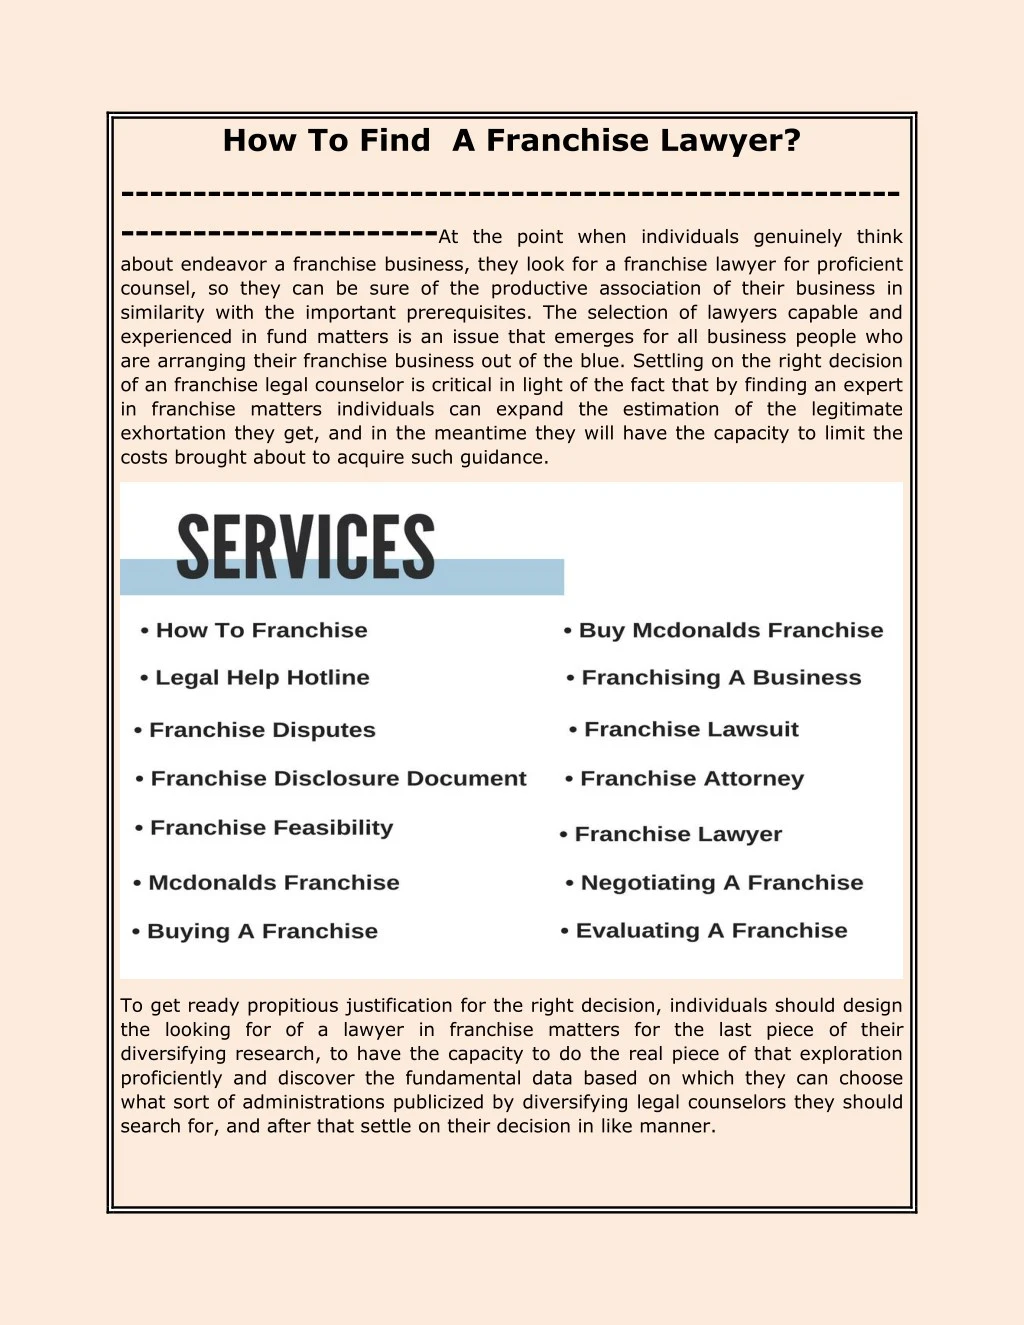 how to find a franchise lawyer